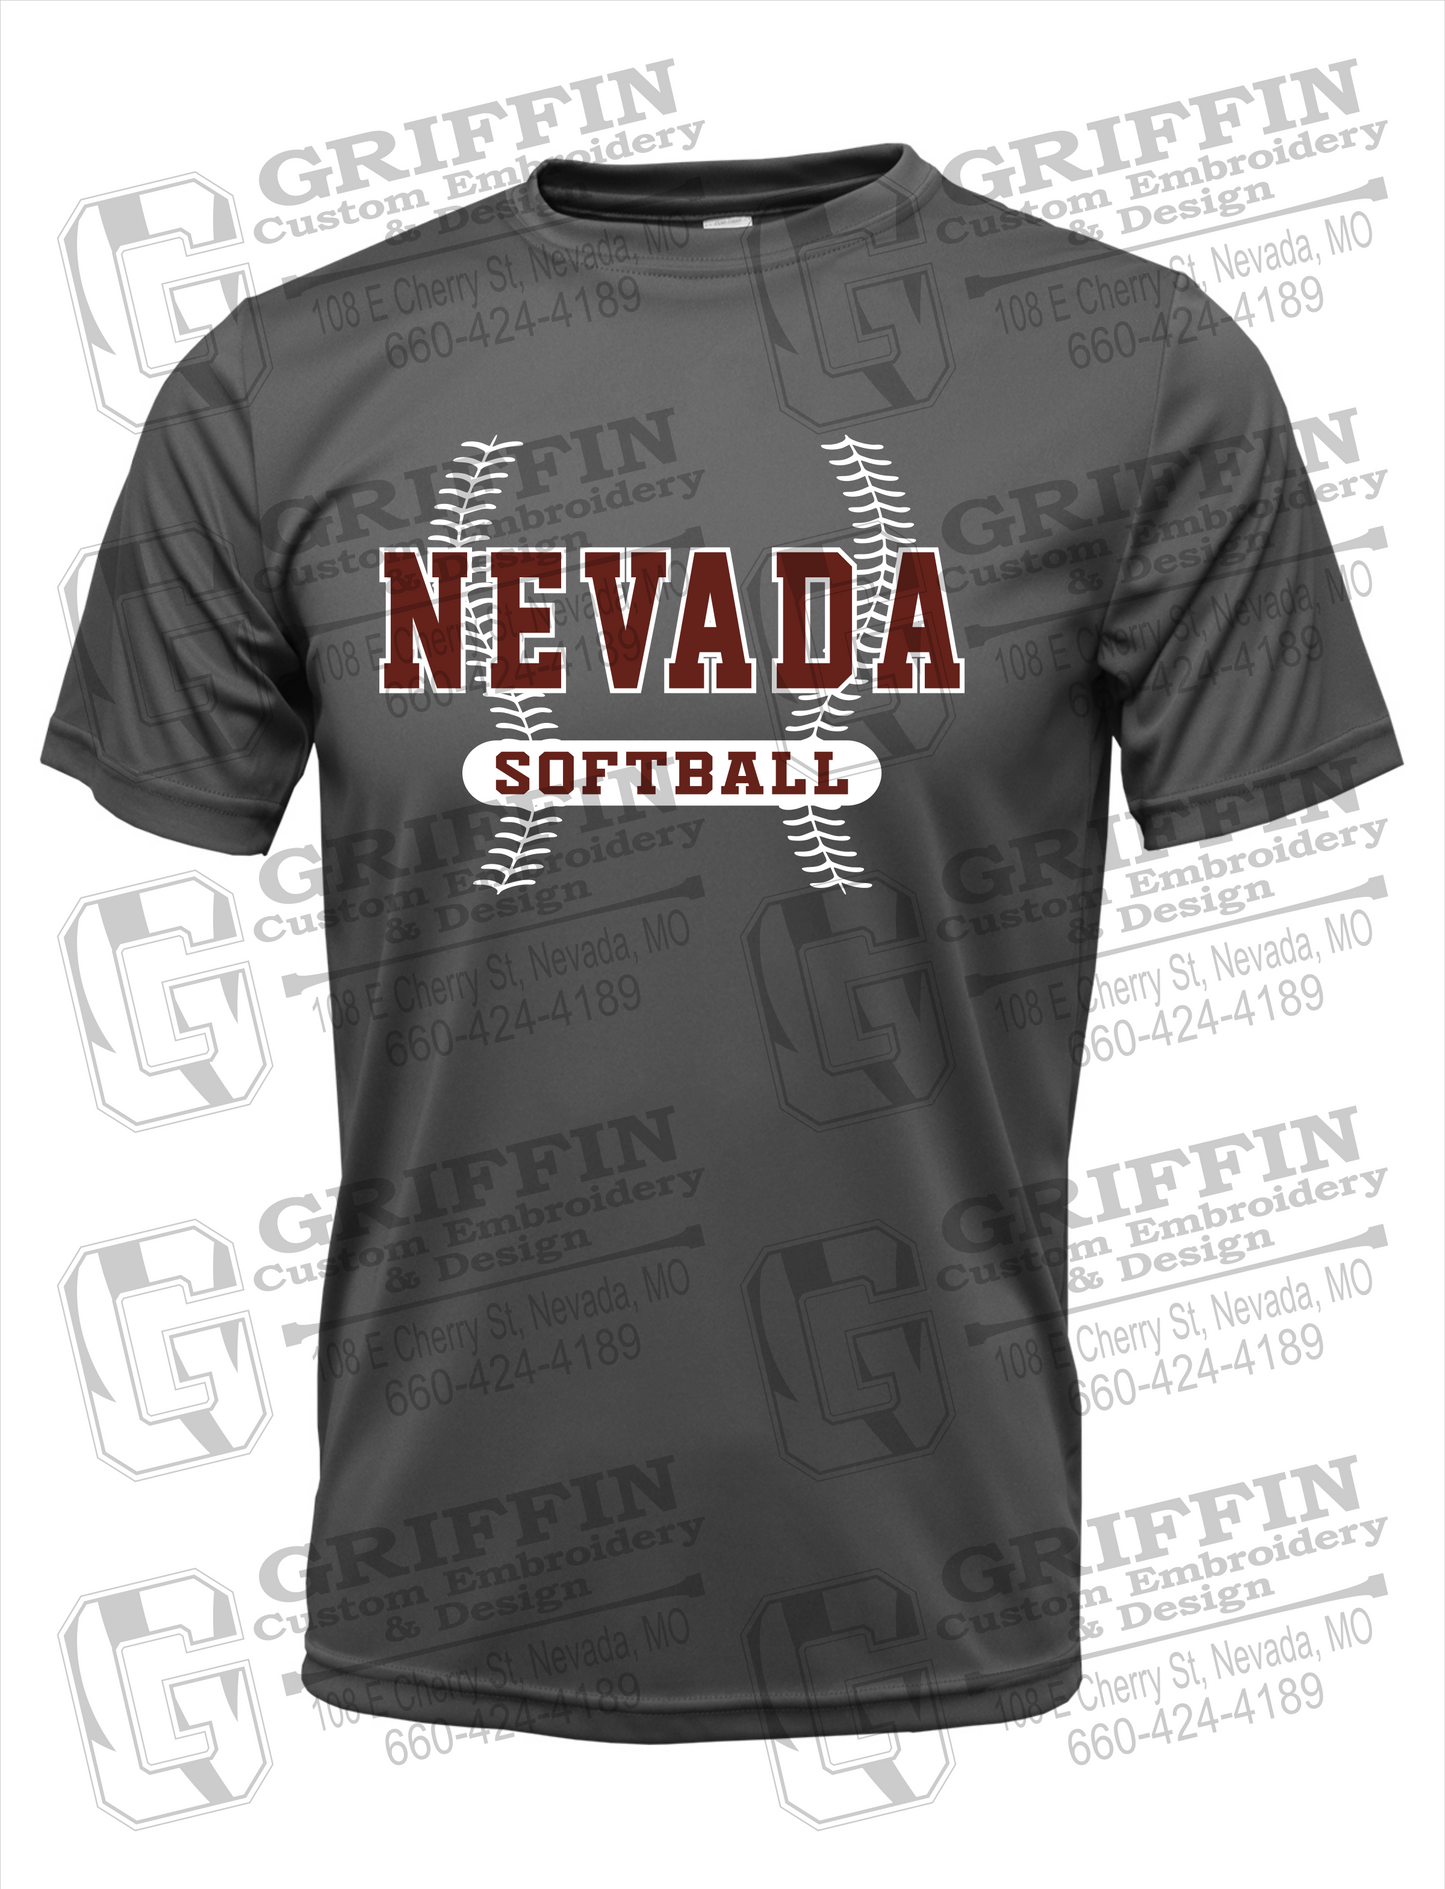 Nevada Tigers 24-E Youth Dry-Fit T-Shirt - Softball